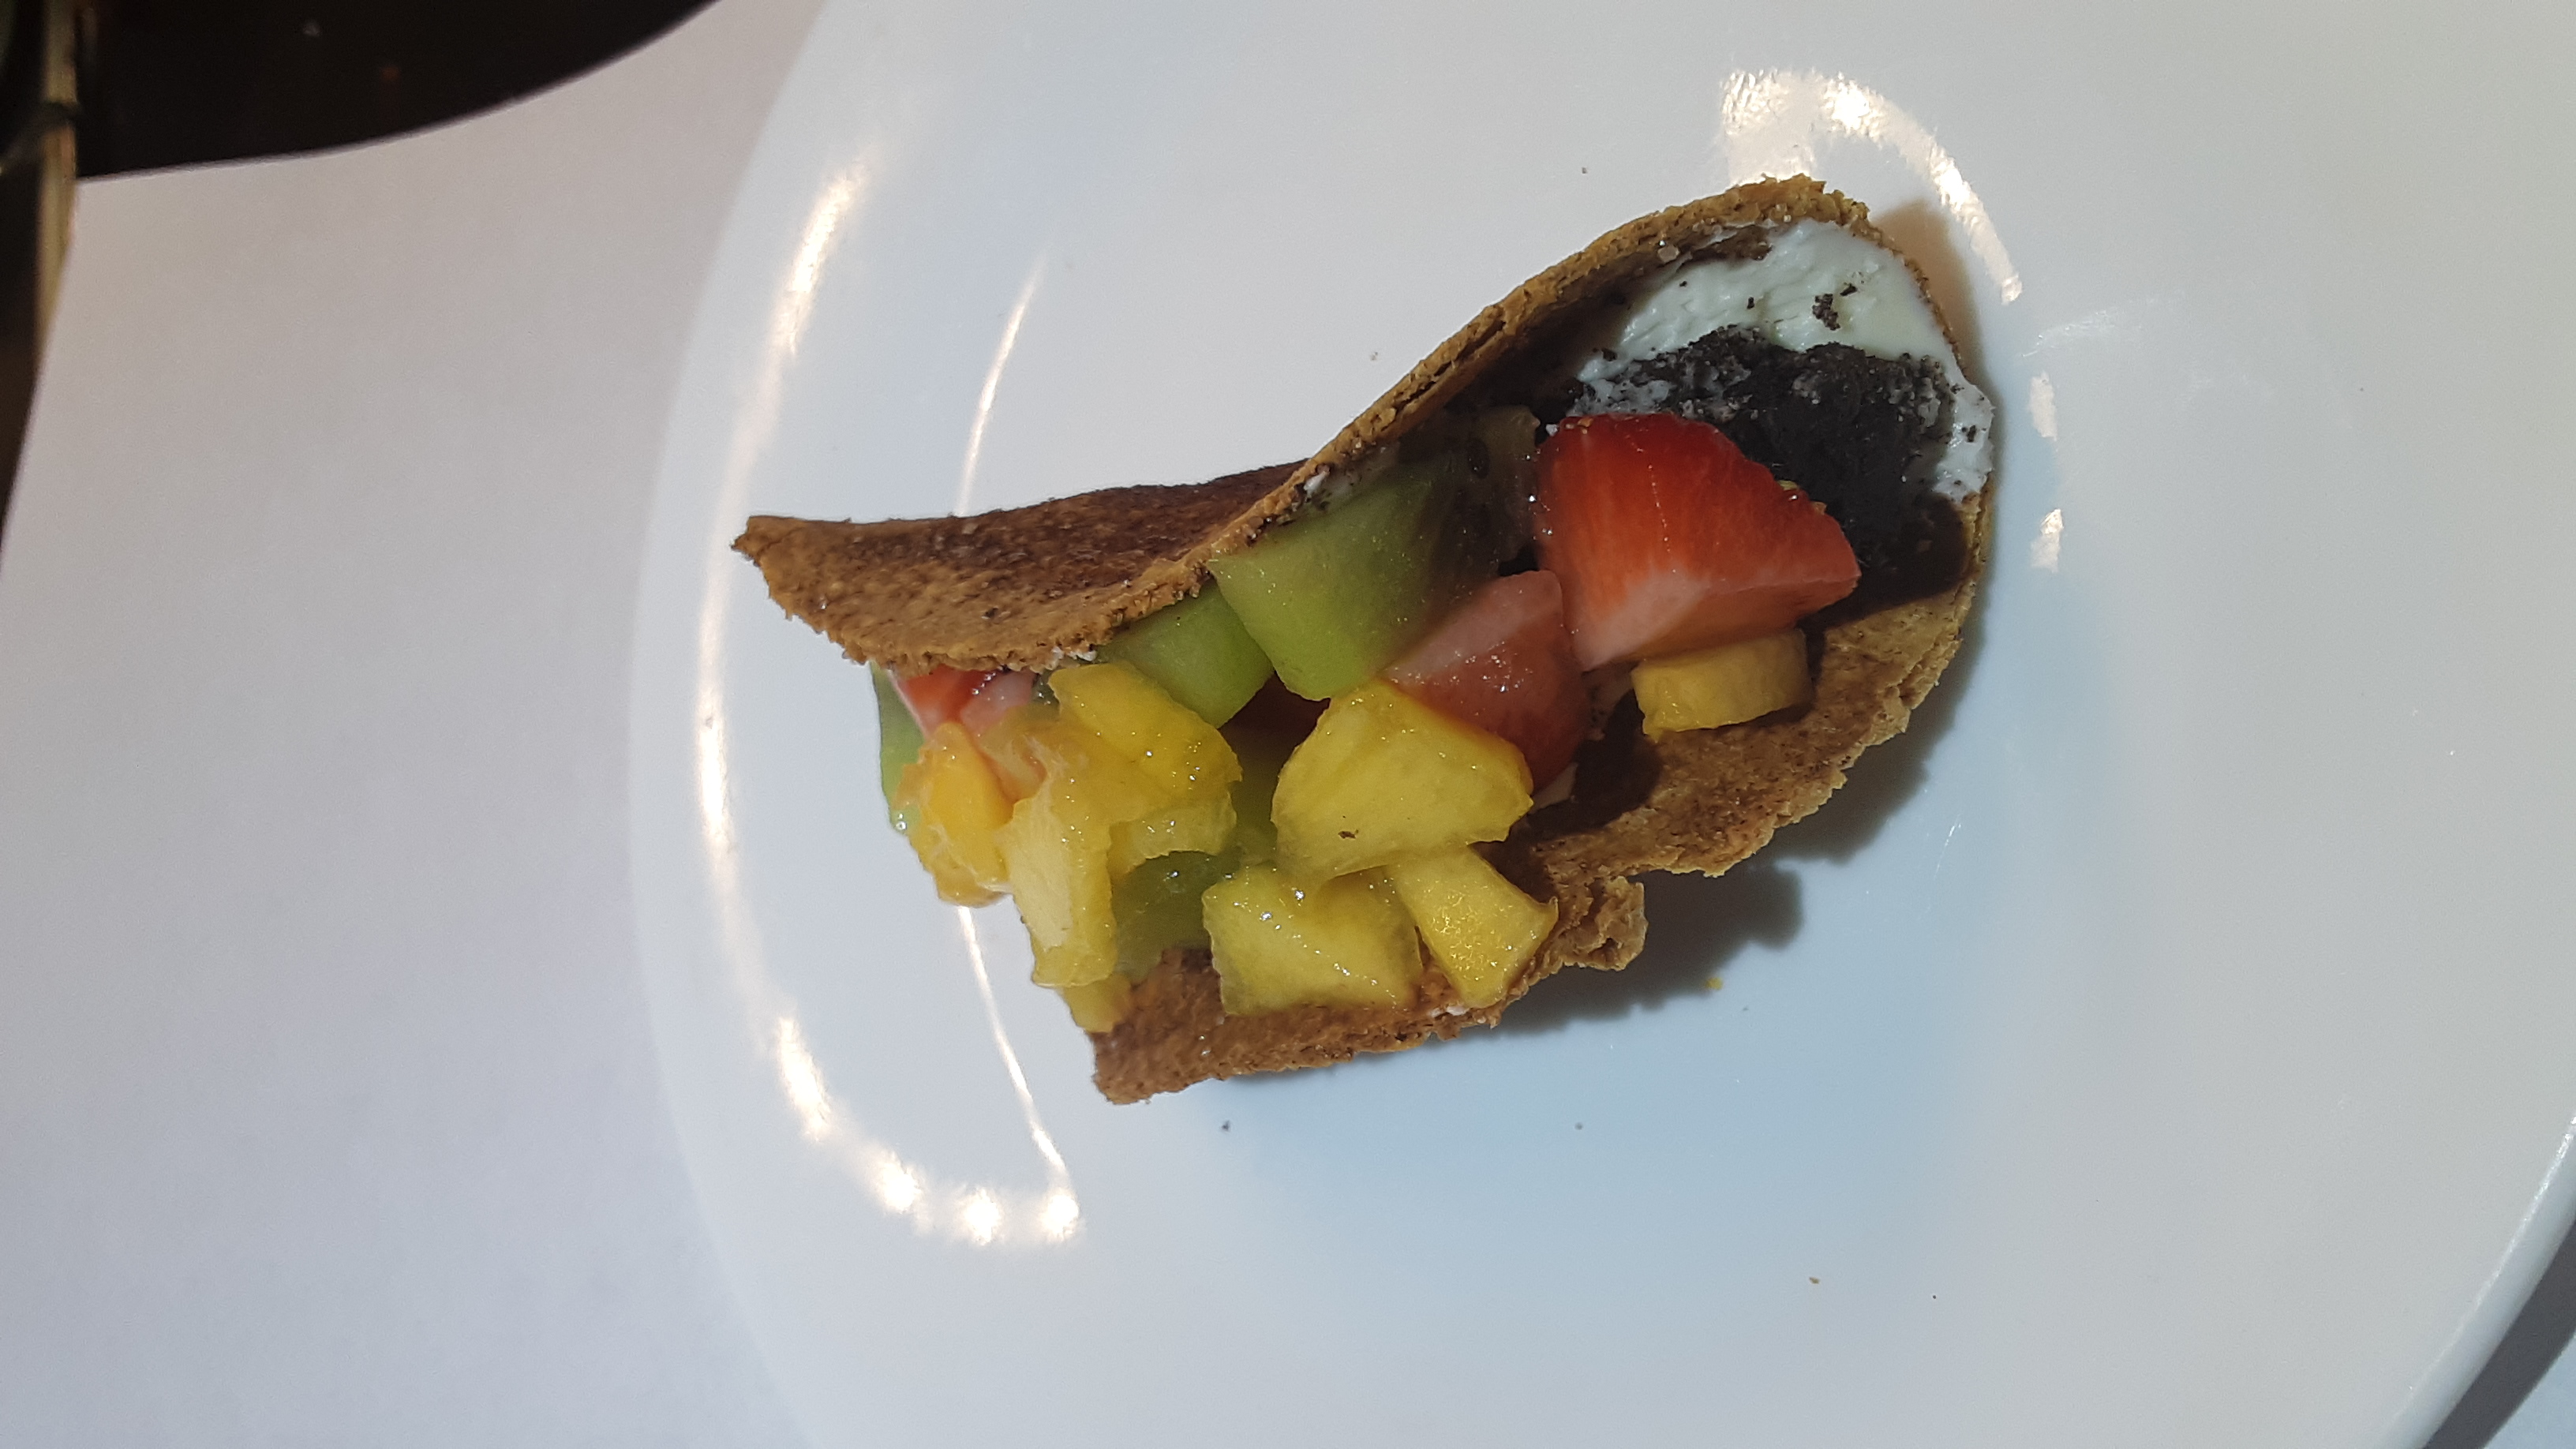 a dessert taco with fruit and frosting